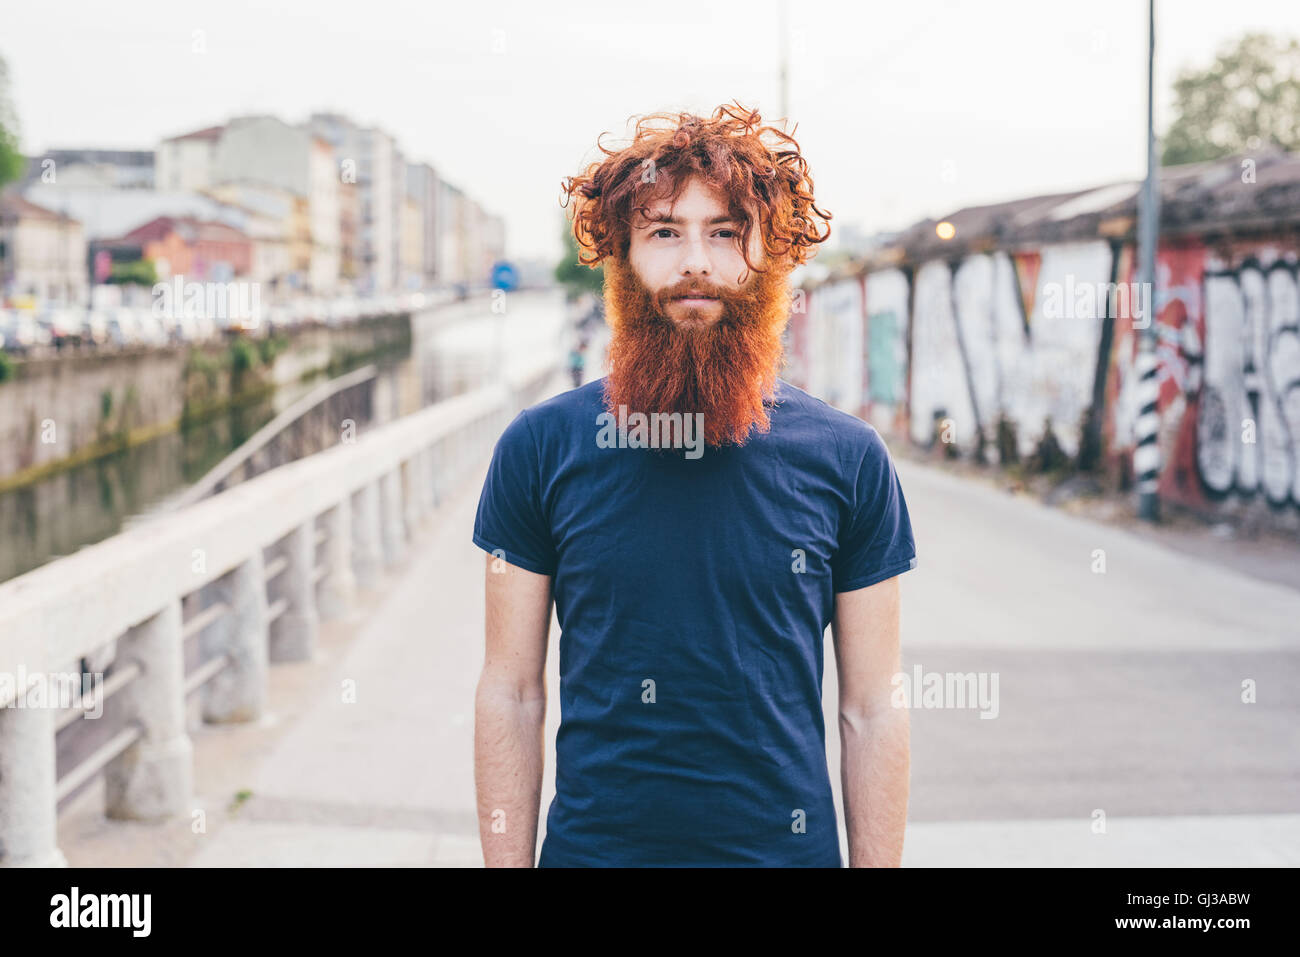 Close up portrait of young male hipster with red hair and beard standing on bridge Stock Photo